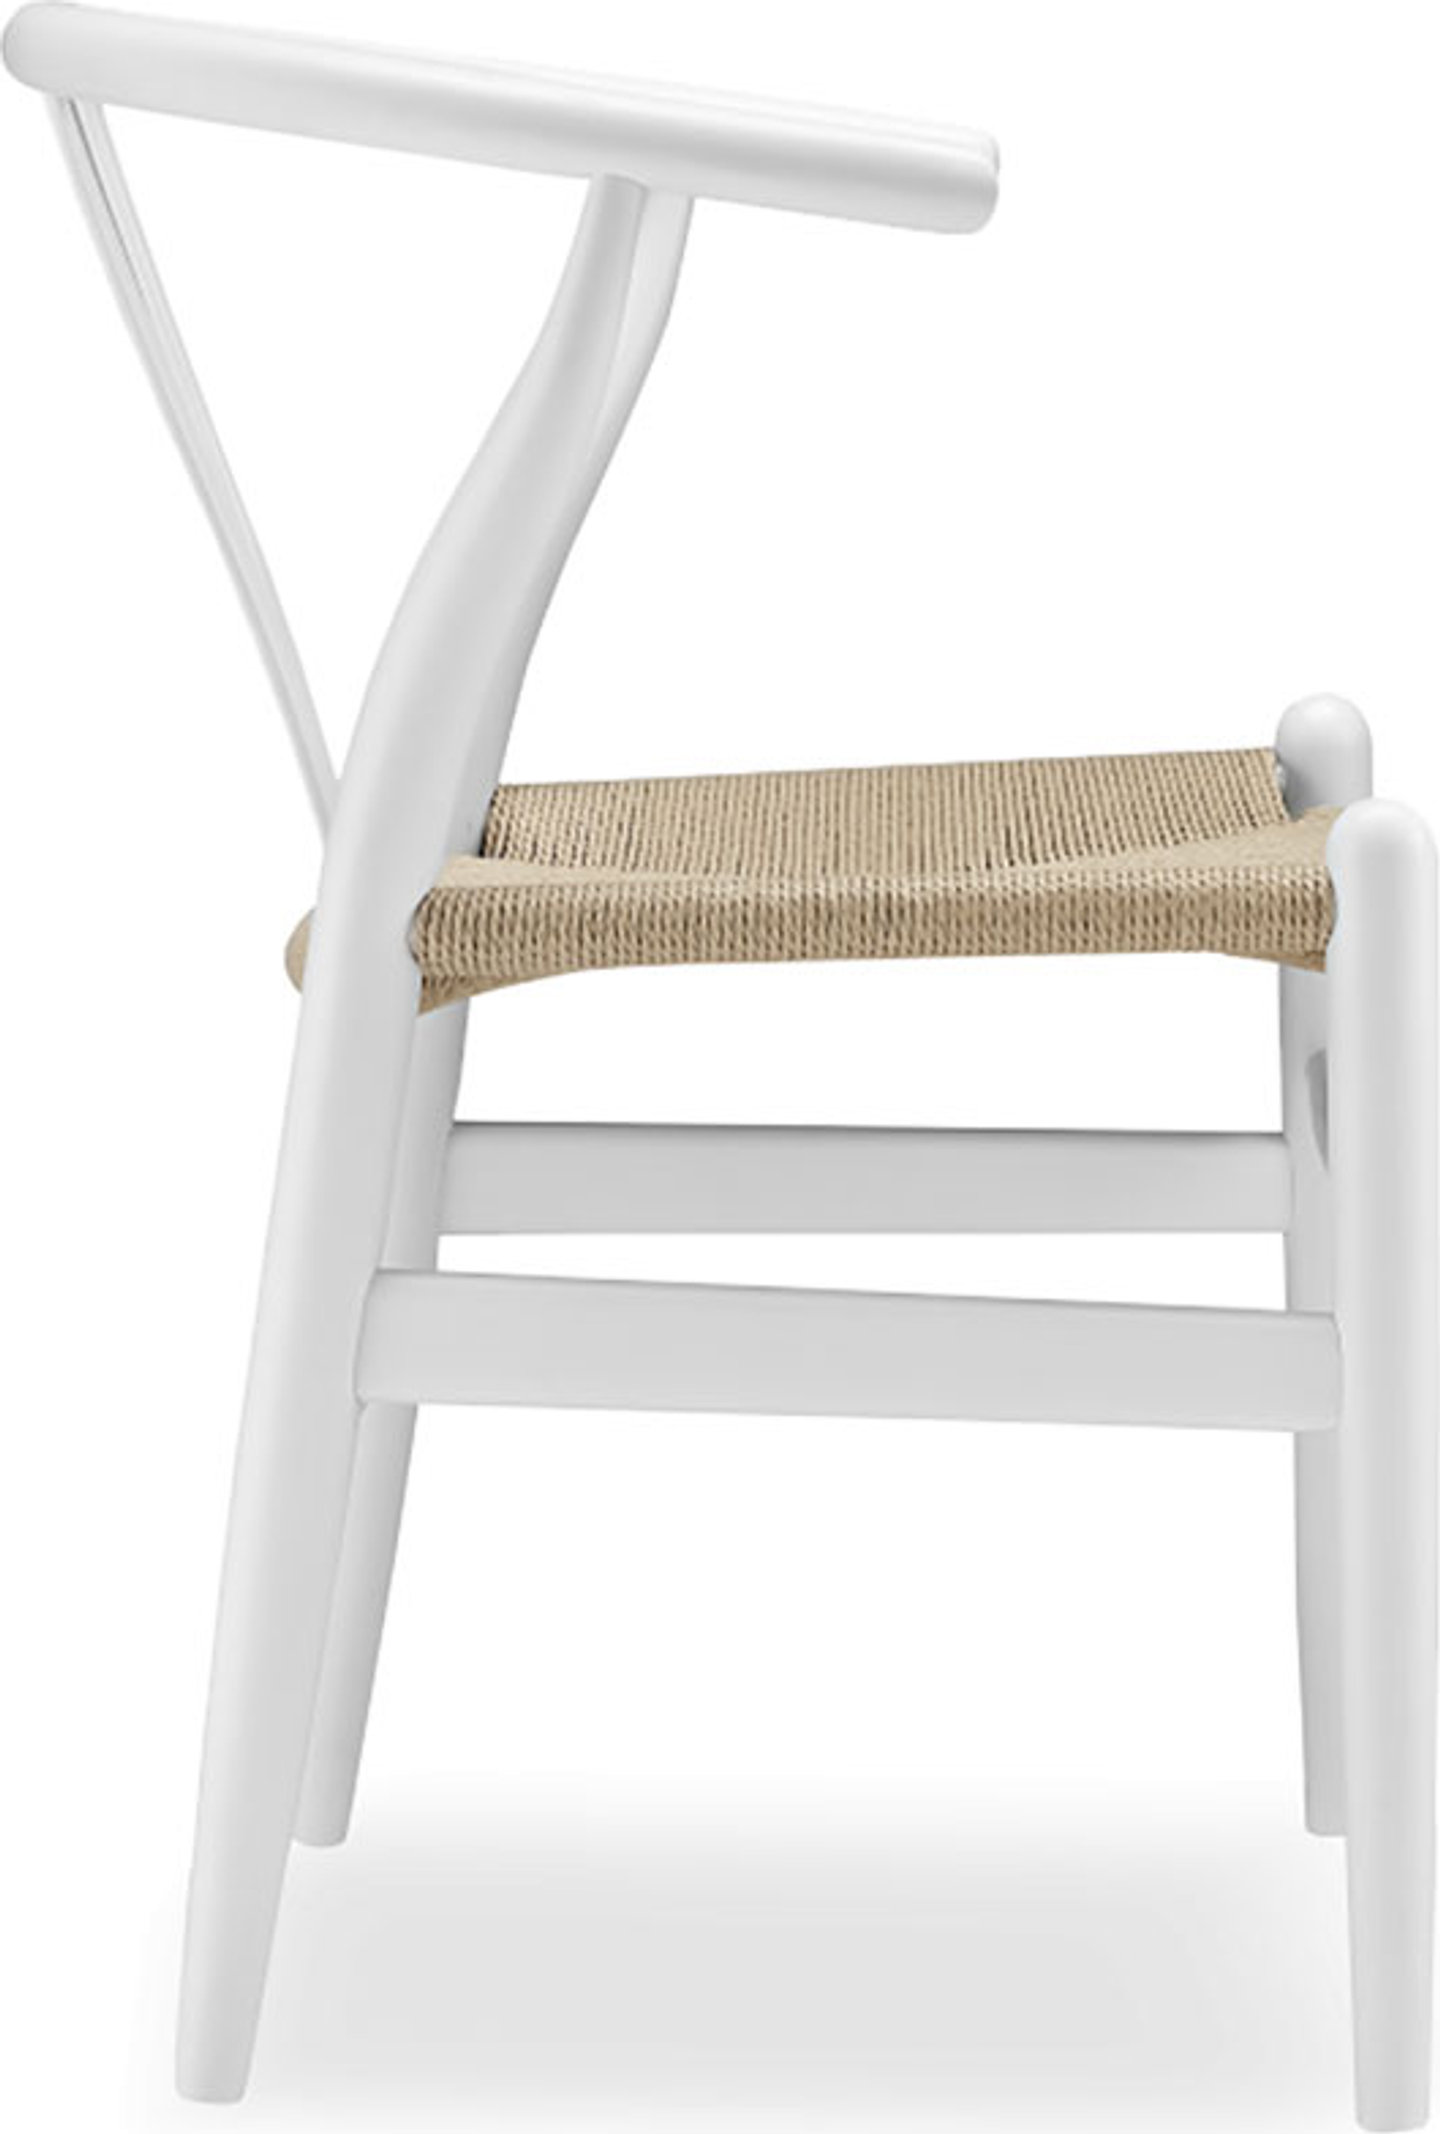 Wishbone (Y) Chair - CH24 Lacquered/White image.